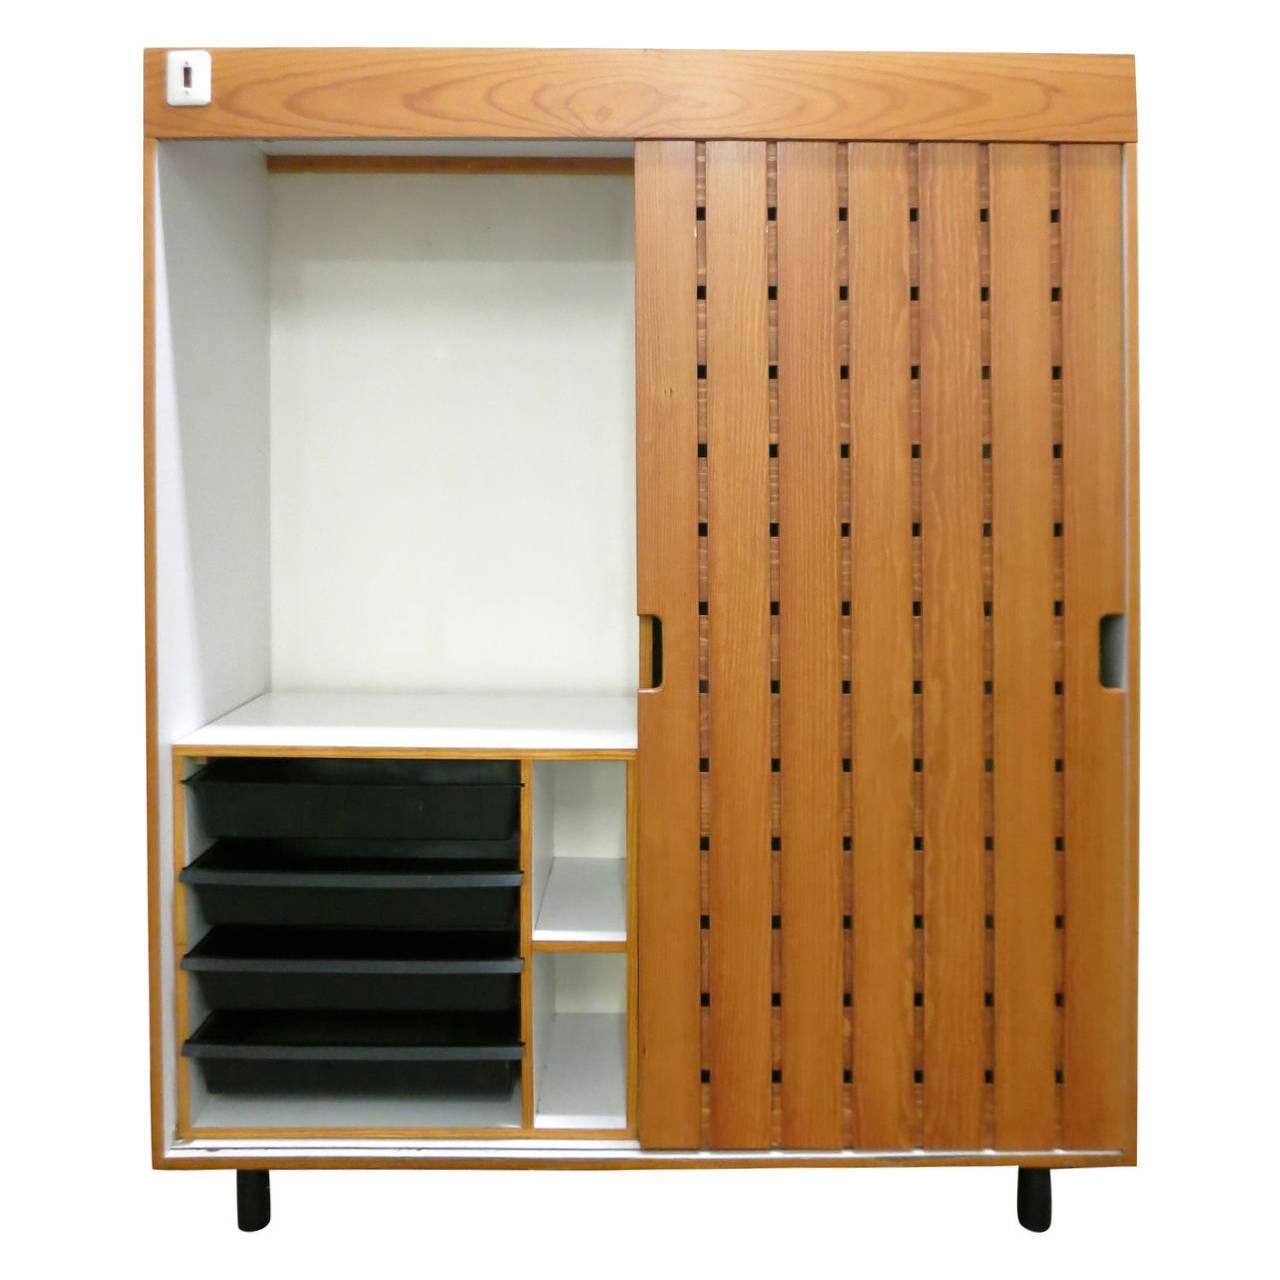 Wardrobe with a single sliding slatted wood door. The interior is white laminate with a separate pull-out cabinet with drawers in molded plastic. Each drawer is stamped 